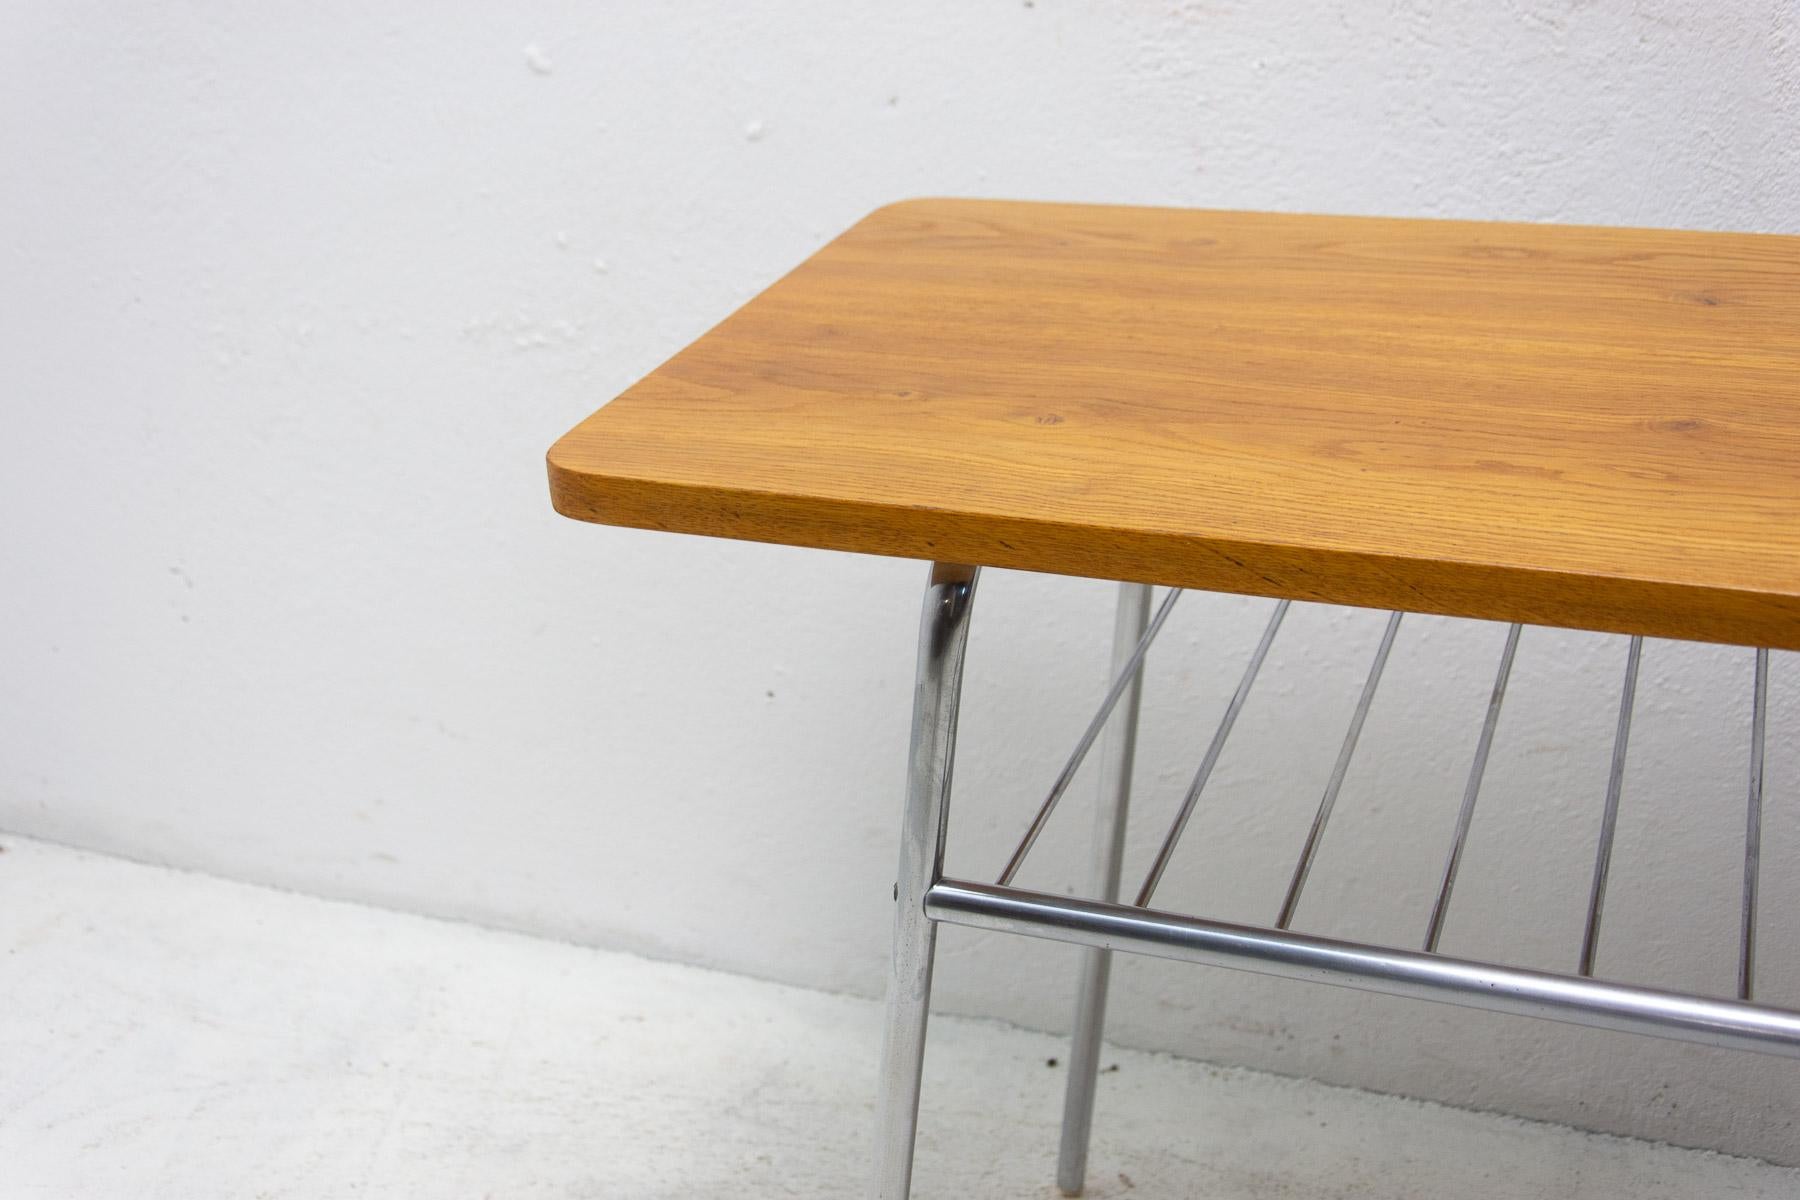 Fully Renovated Chrome and Wood Side Table, 1950s, Czechoslovakia For Sale 3